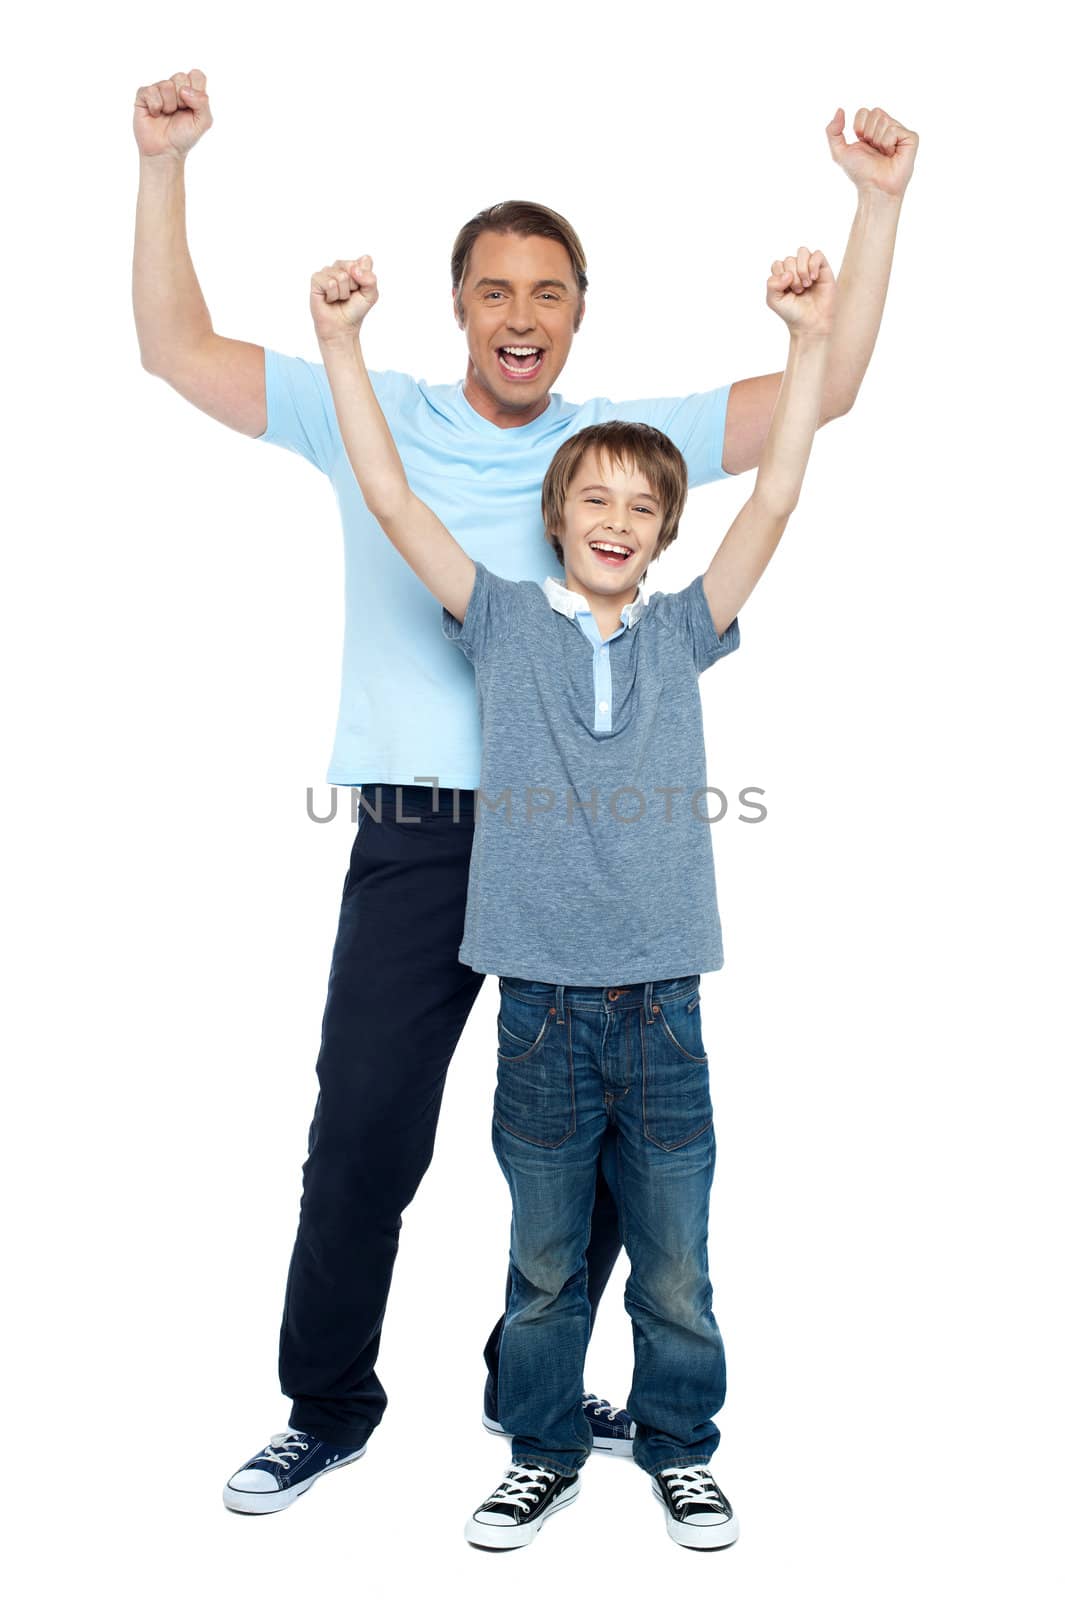 Father and son celebrating their success. Rejoicing with raised arms.